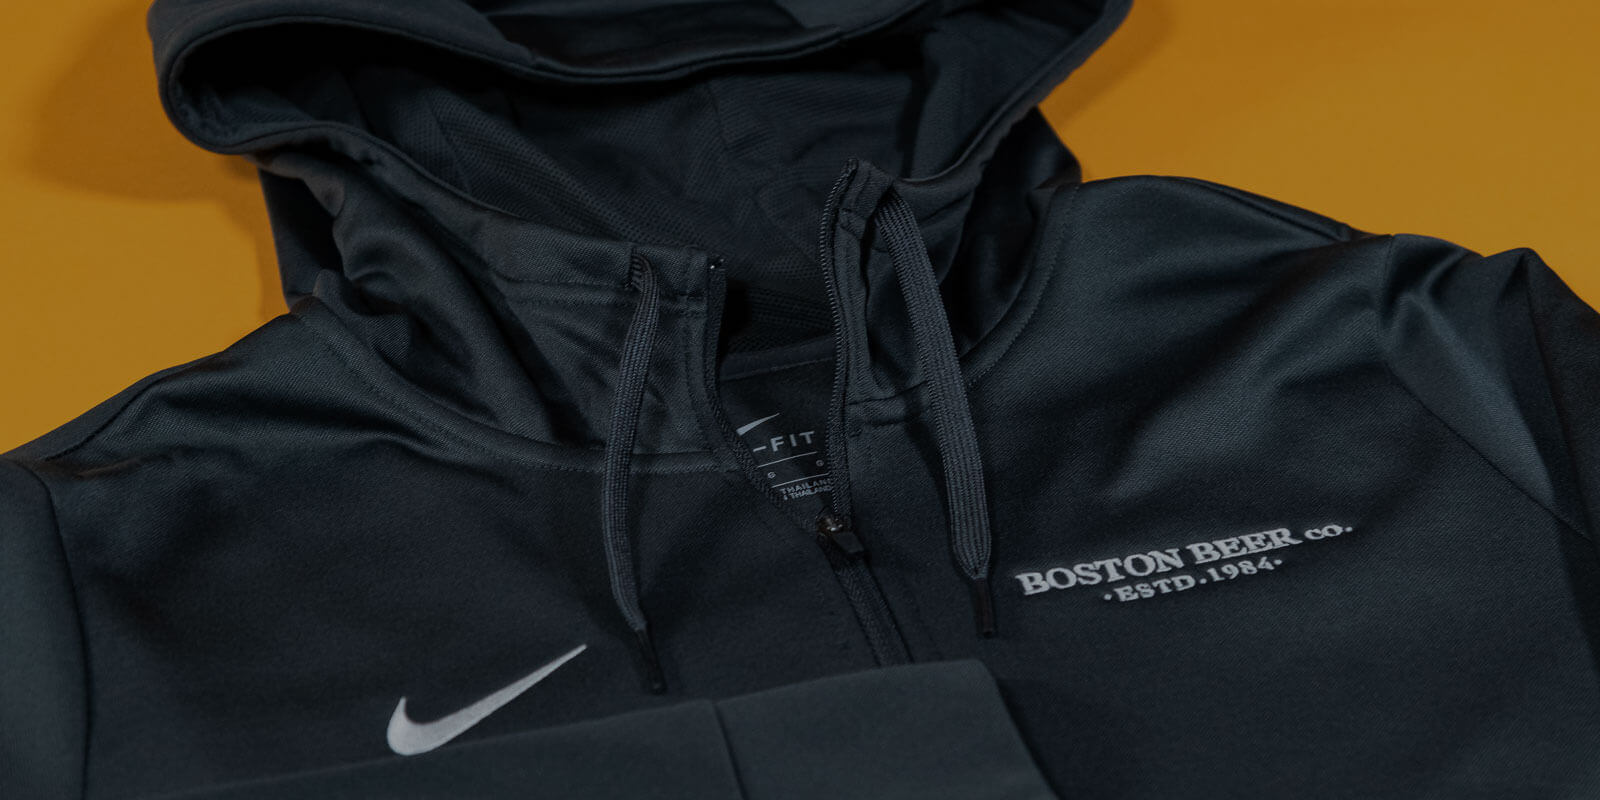 Branded Nike Merchandise — Connect with Elite Style and Technical Innovation